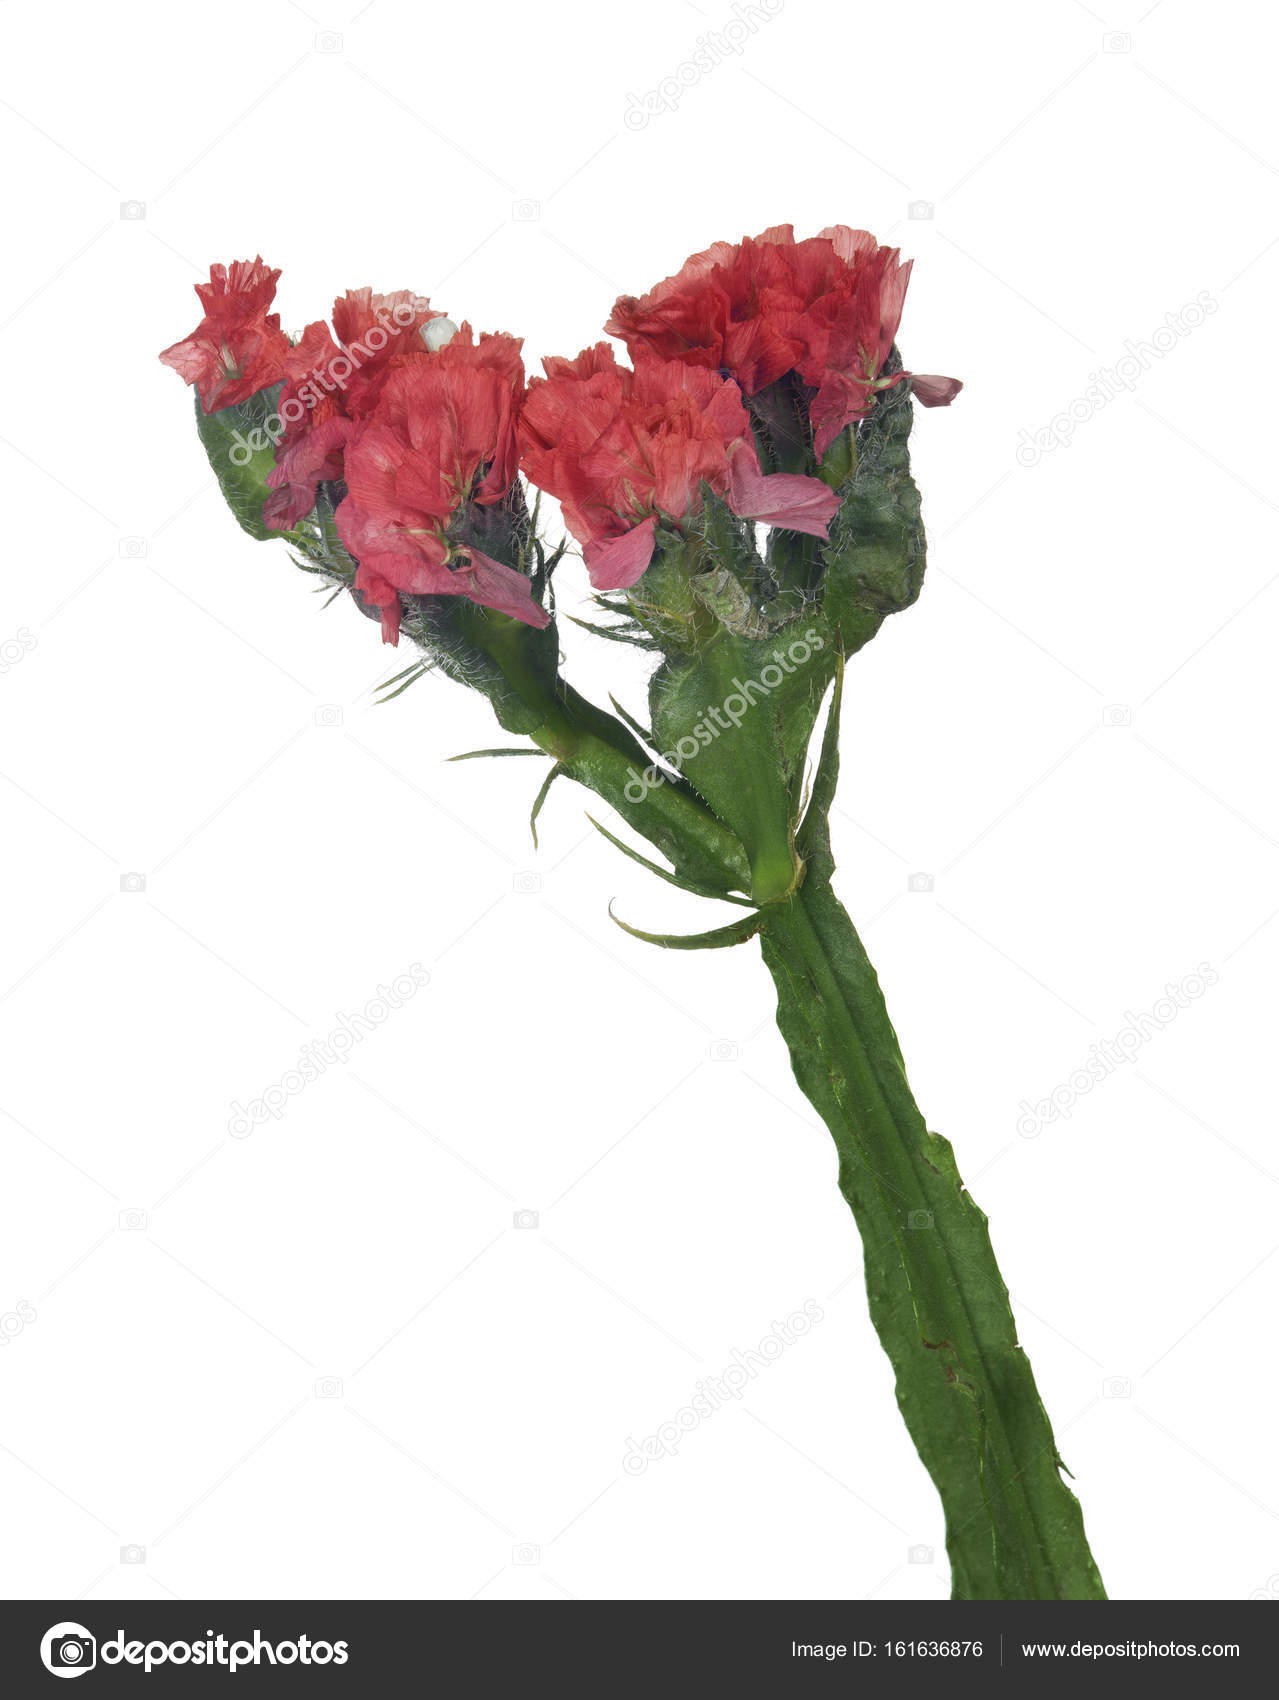 wild small red isolated flowers — Stock Photo © Dr.PAS #161636876